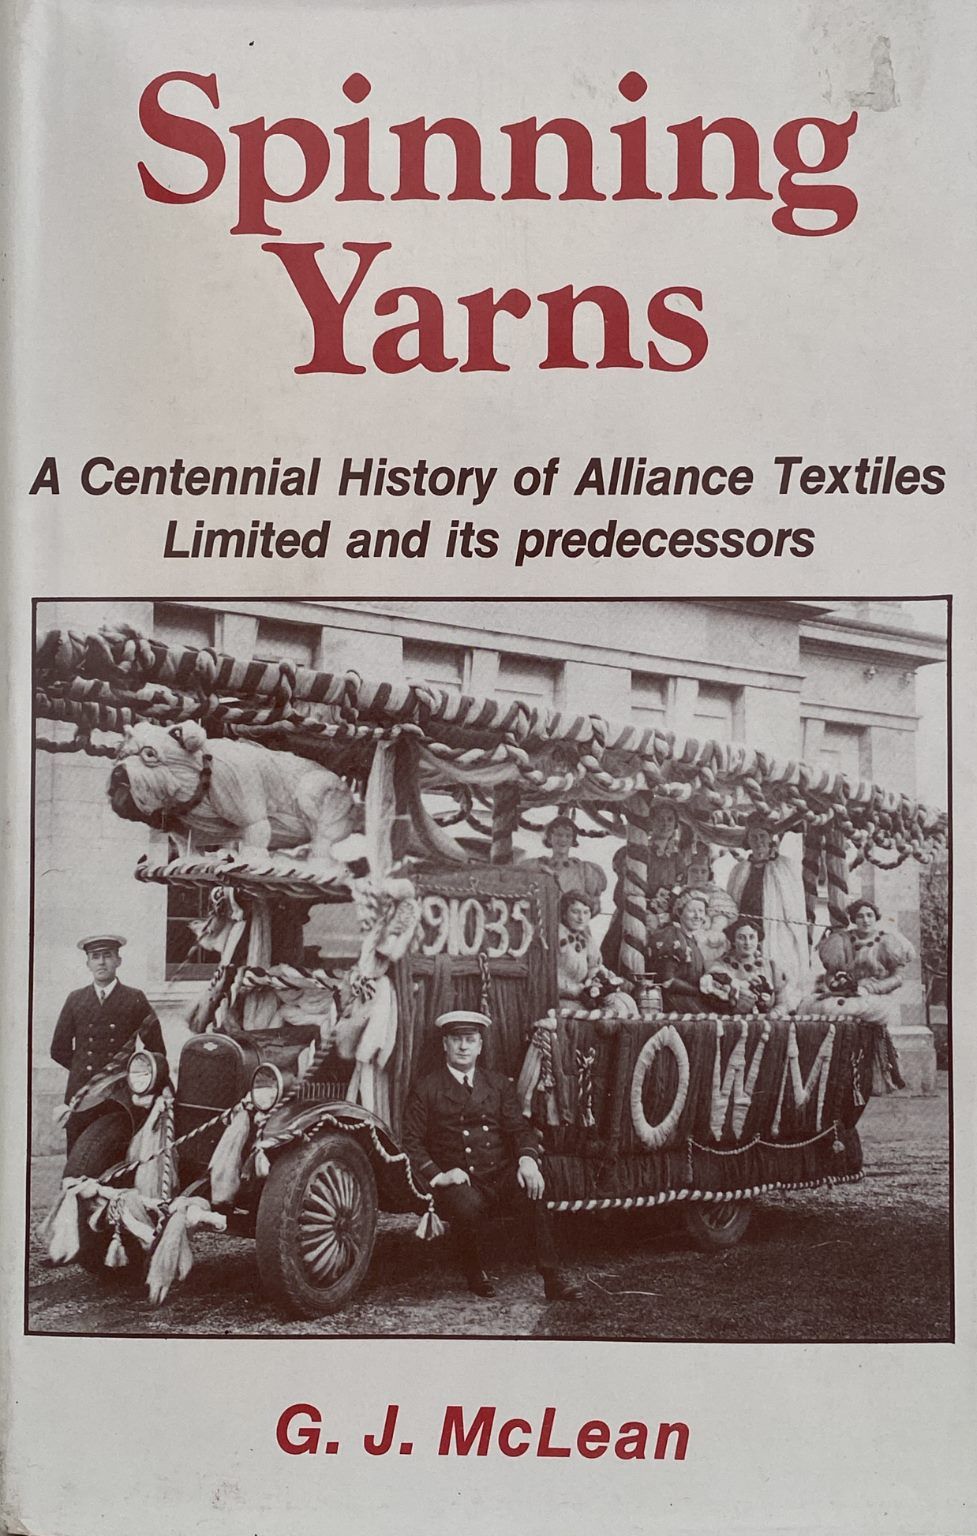 SPINNING YARNS: A Centennial History of Alliance Textiles